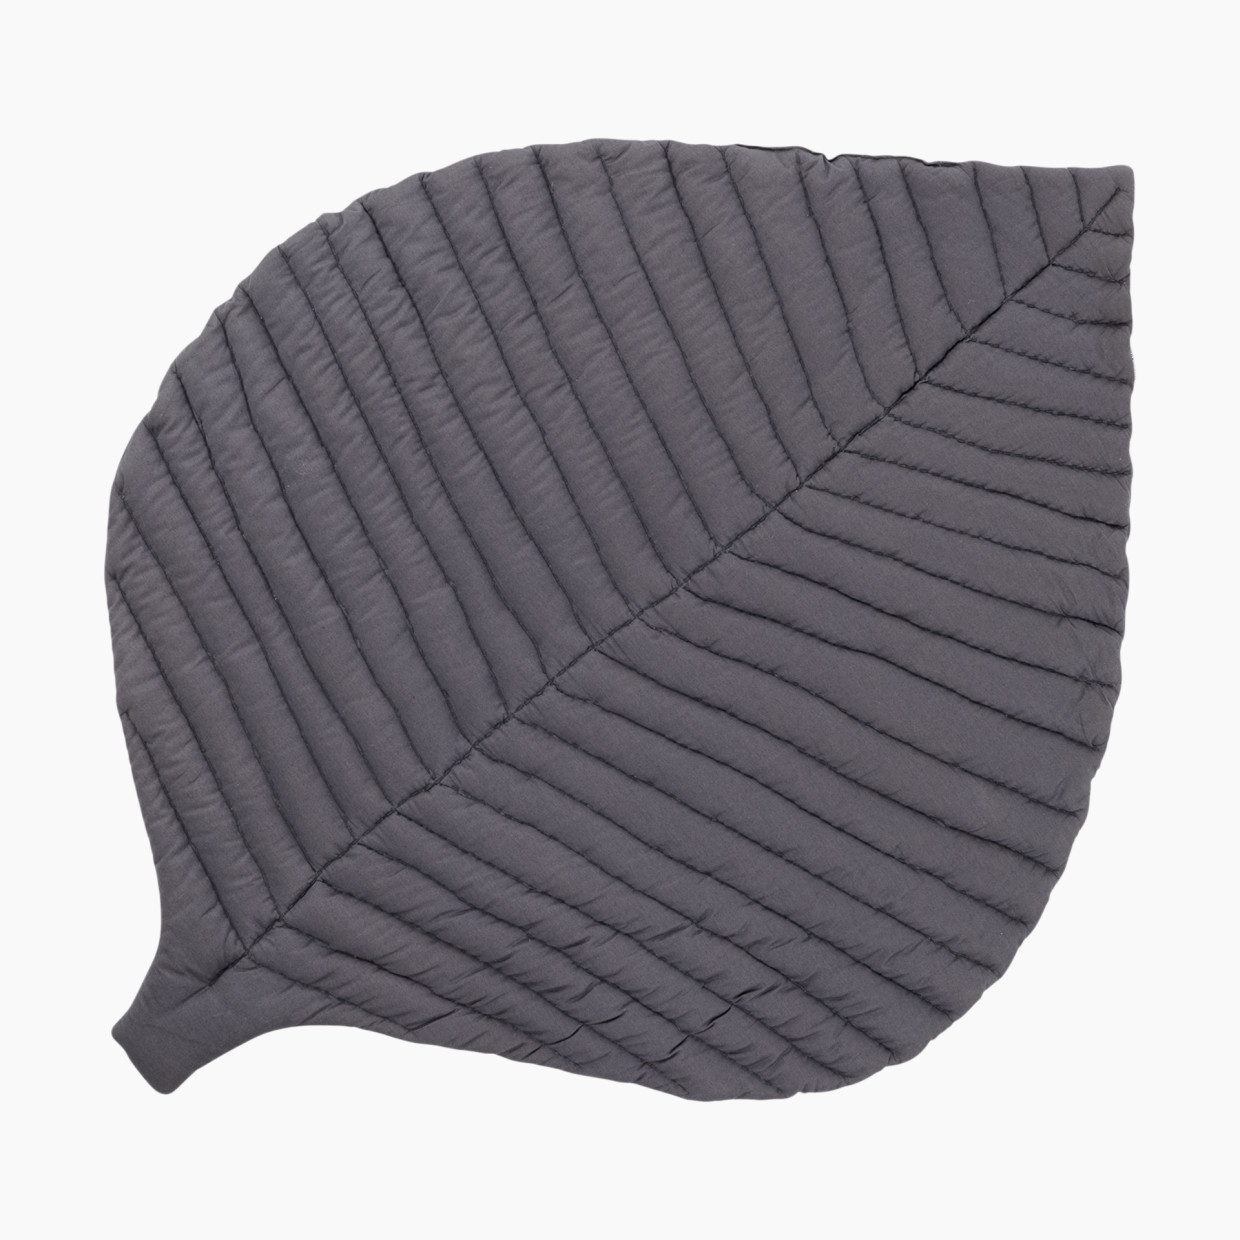 Toddlekind Organic Cotton Quilted Leaf Play Mat - Anchor.